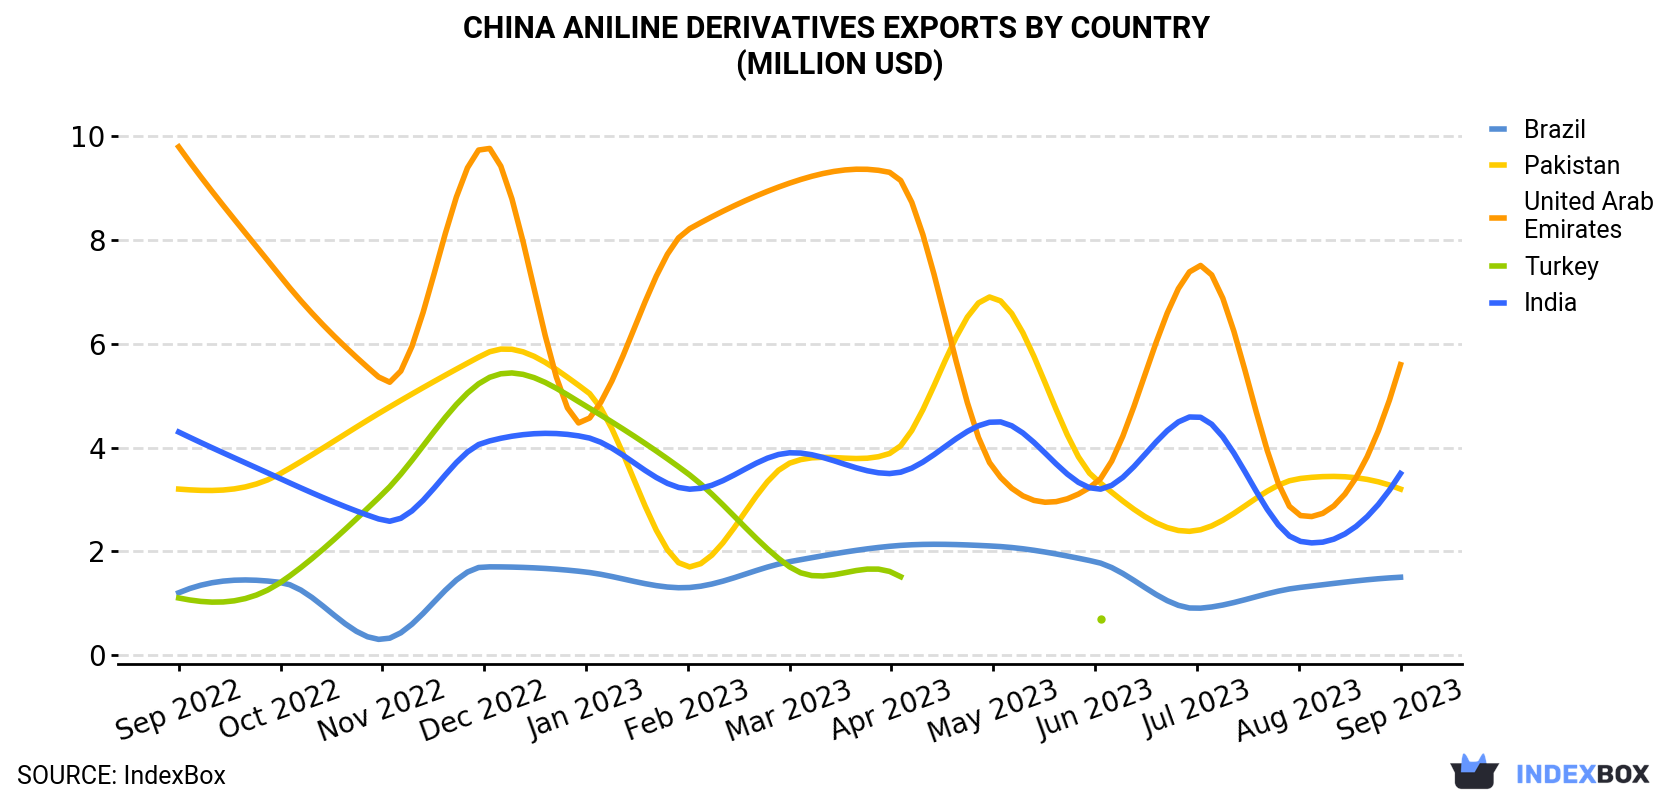 China Aniline Derivatives Exports By Country (Million USD)